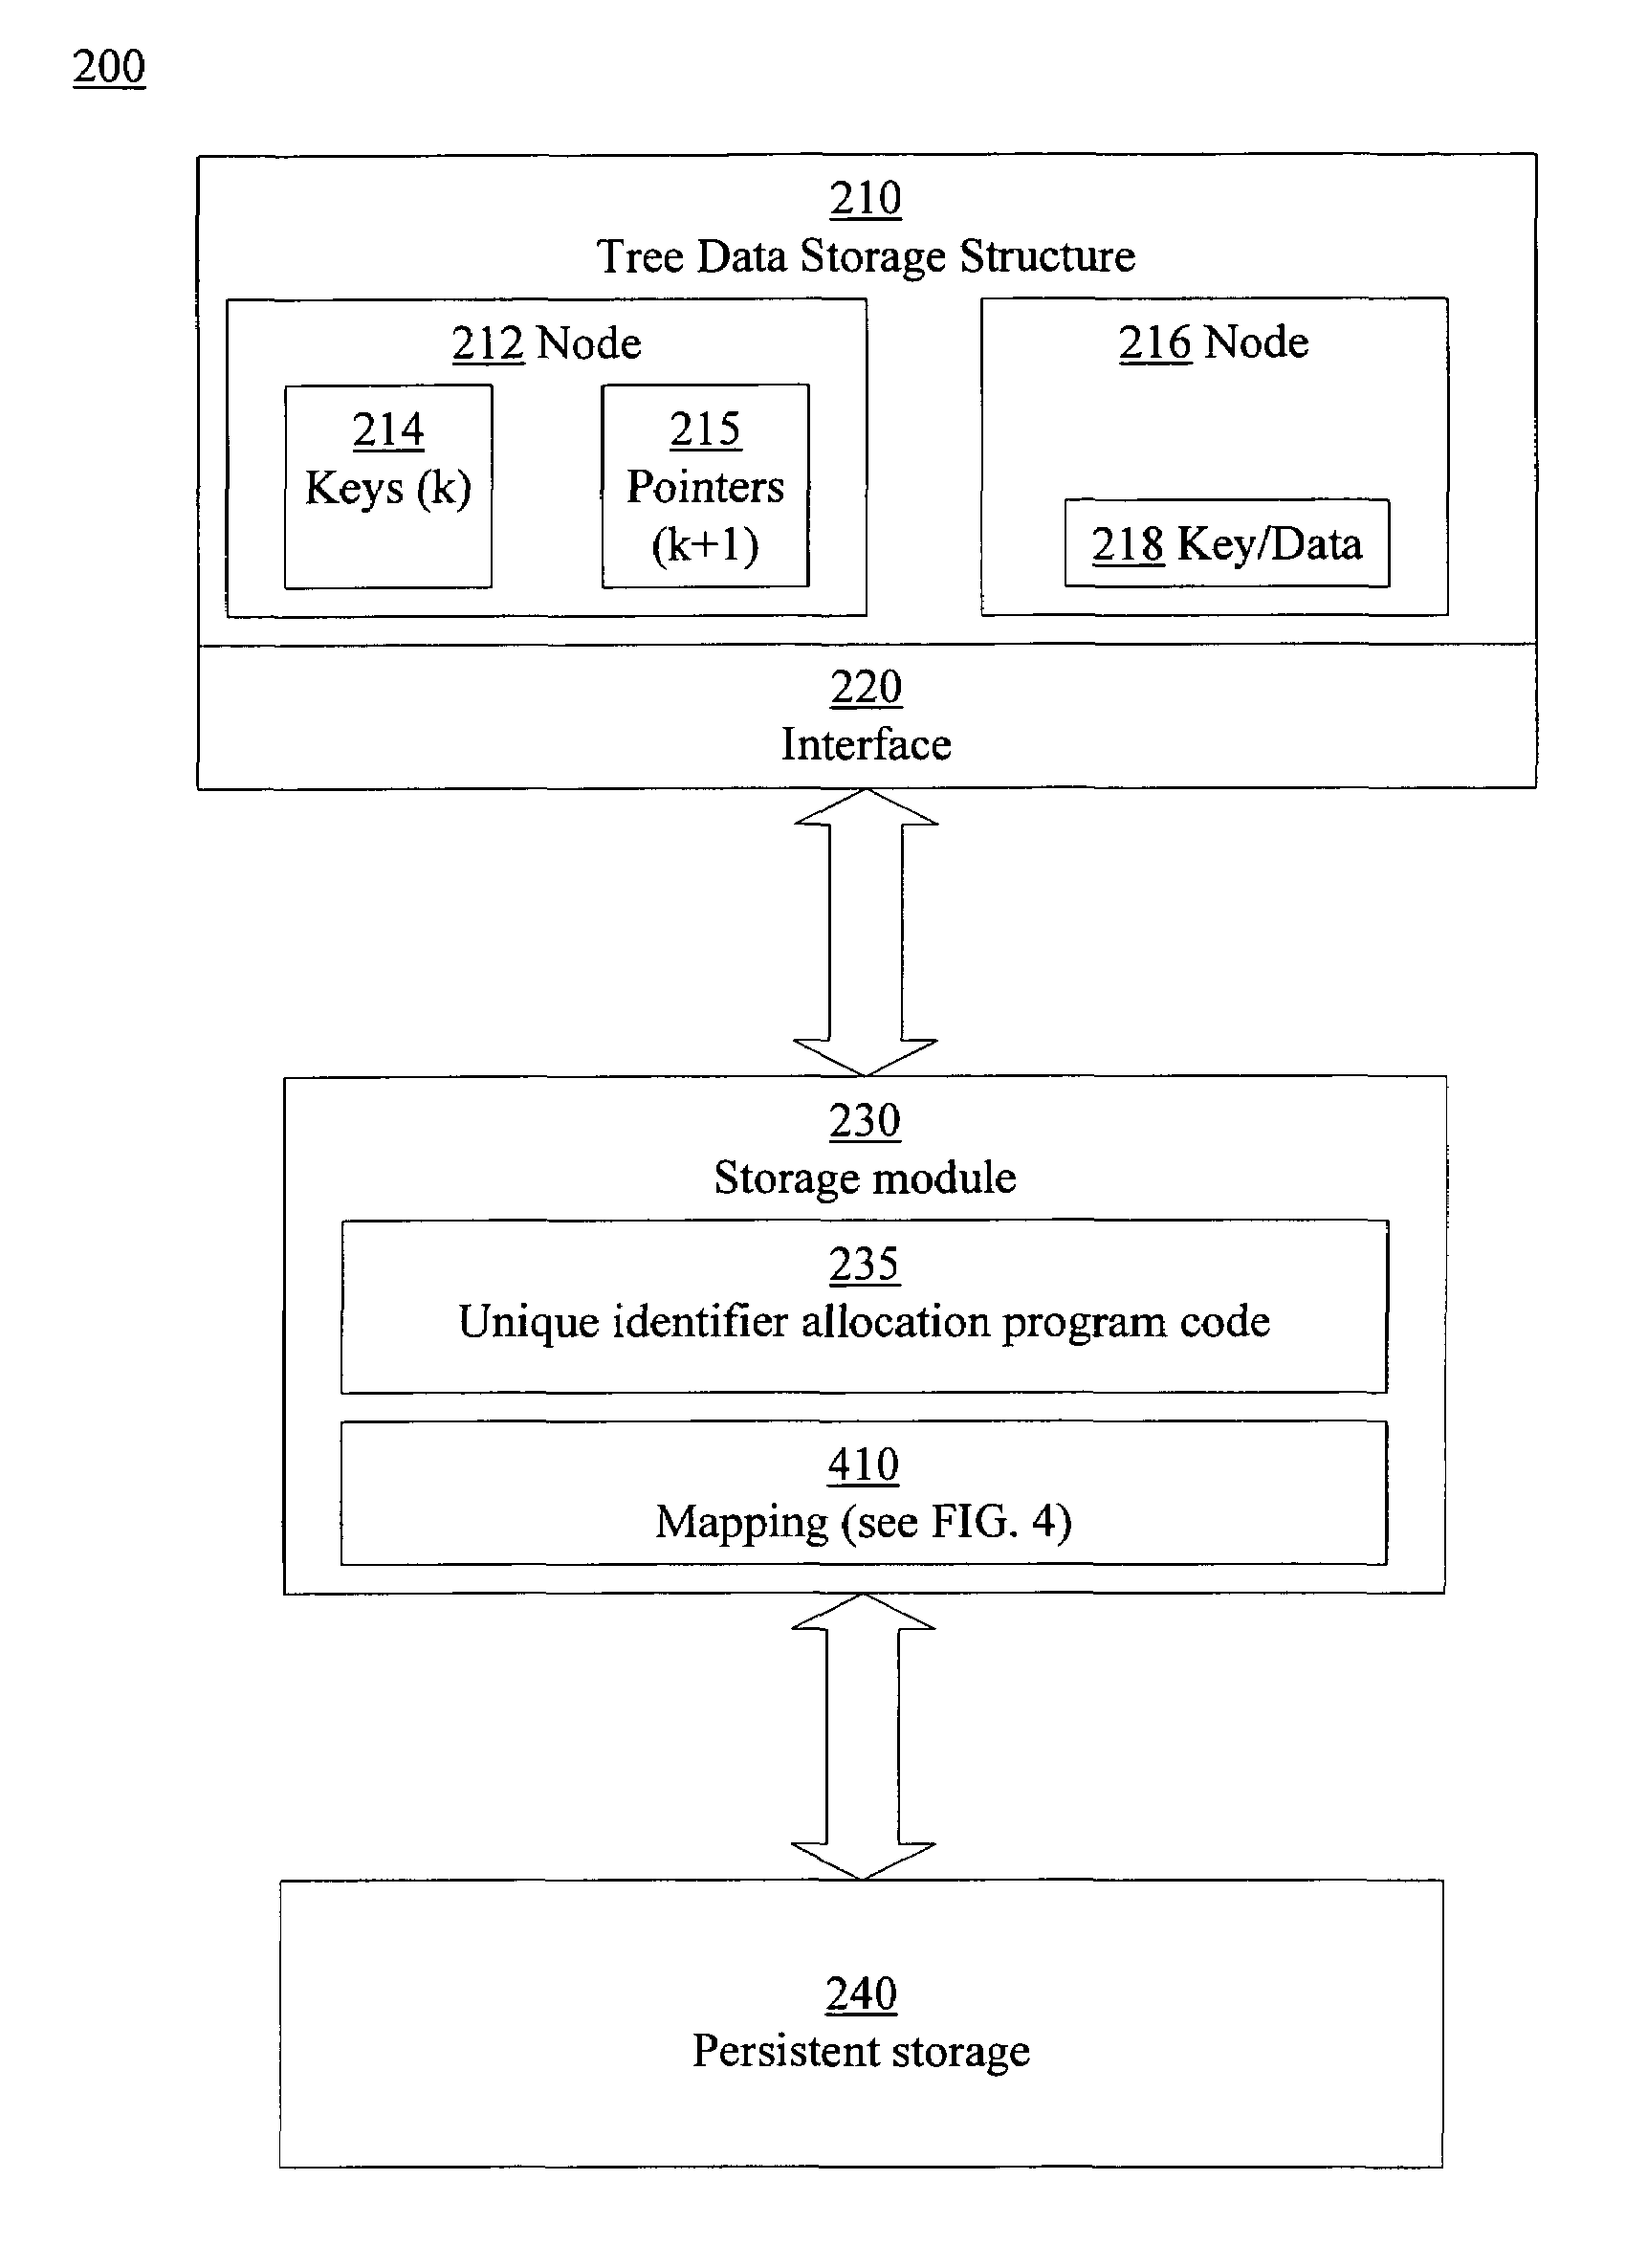 Performing a deletion of a node in a tree data storage structure